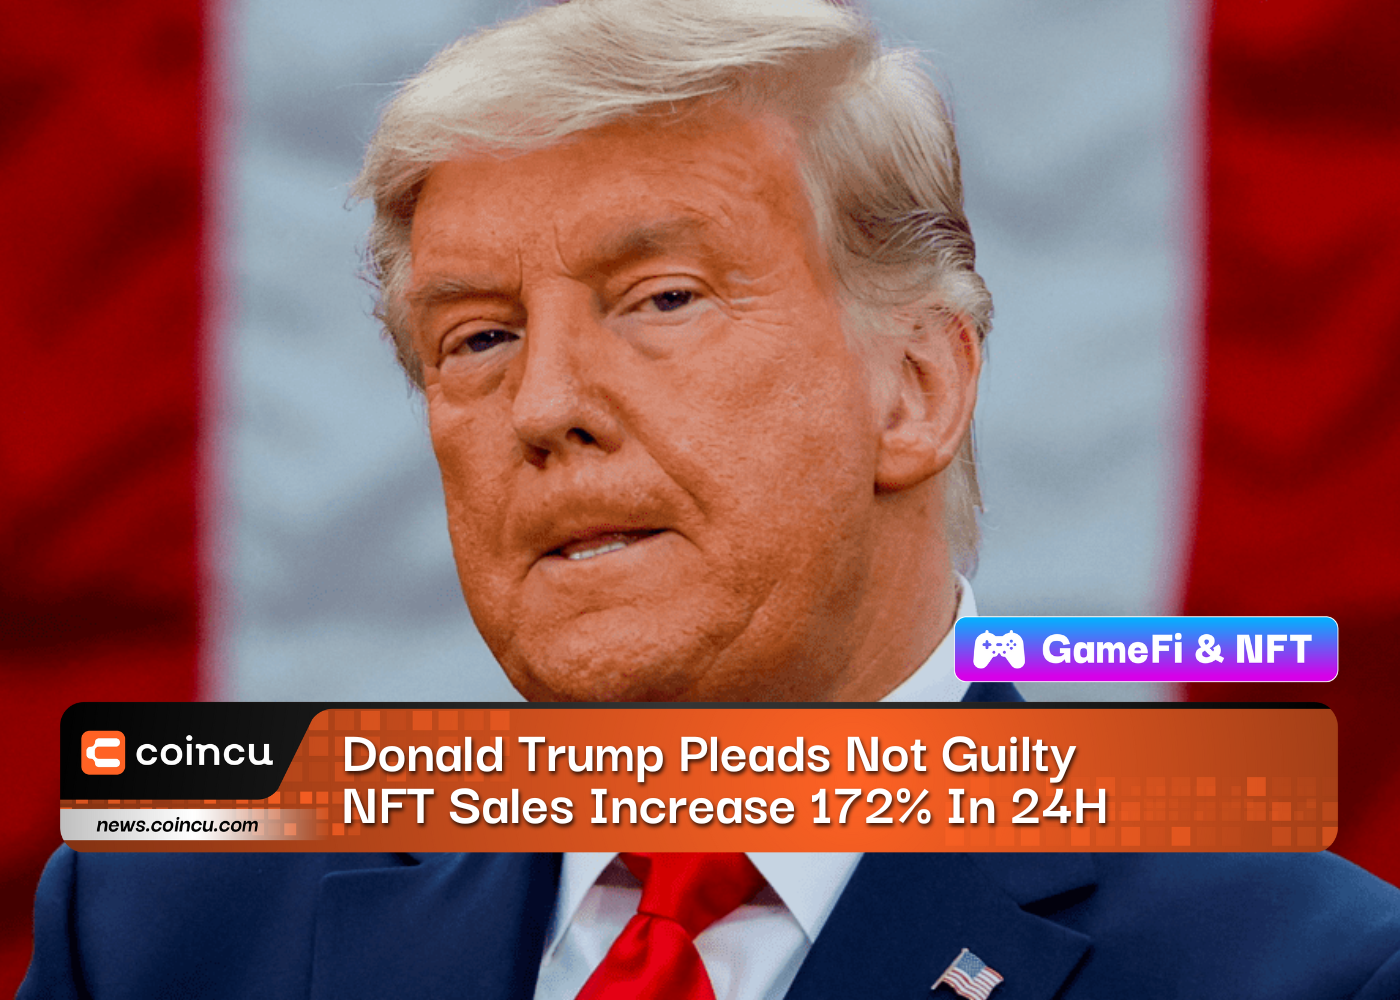 Donald Trump Pleads Not Guilty, NFT Collection Sales Increase 172% In 24H